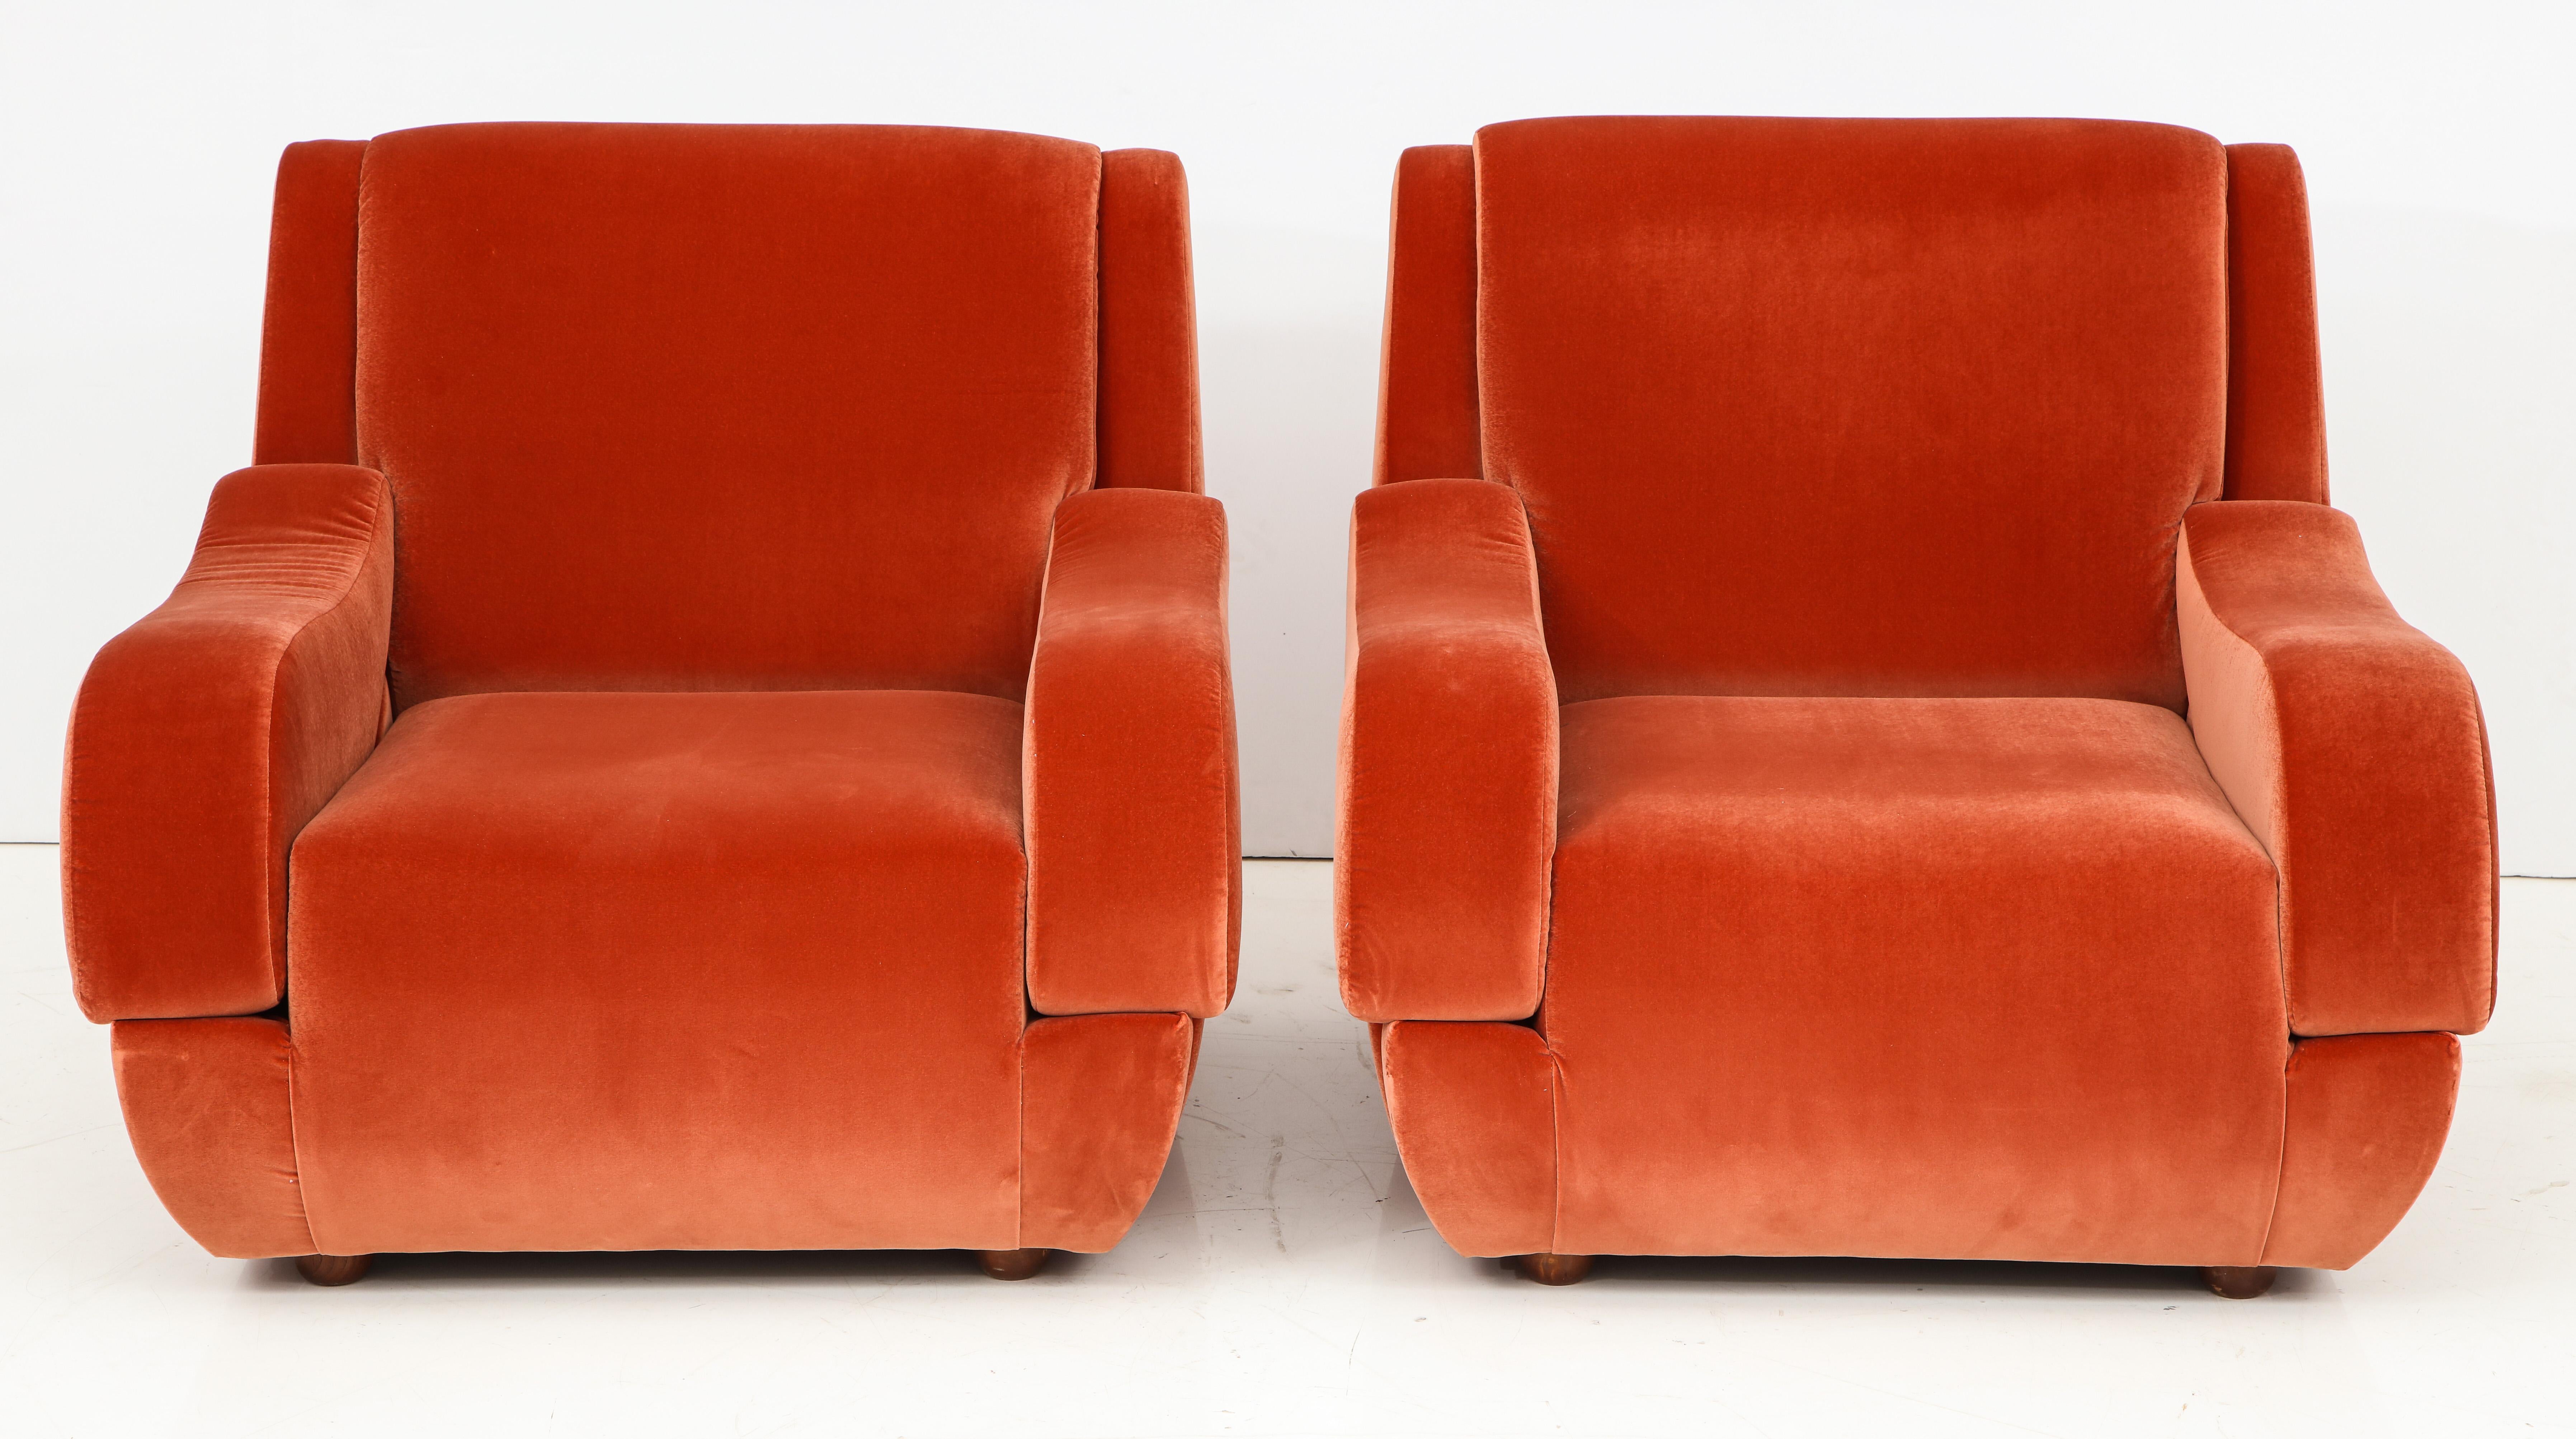 Elegant pair of vintage Italian lounge chairs with sculptural midcentury Italian design in the style of Ico Parisi. Completely restored and newly reupholstered in a Vermillion colored imported soft velvet. Comfortable and sturdy. This pair of